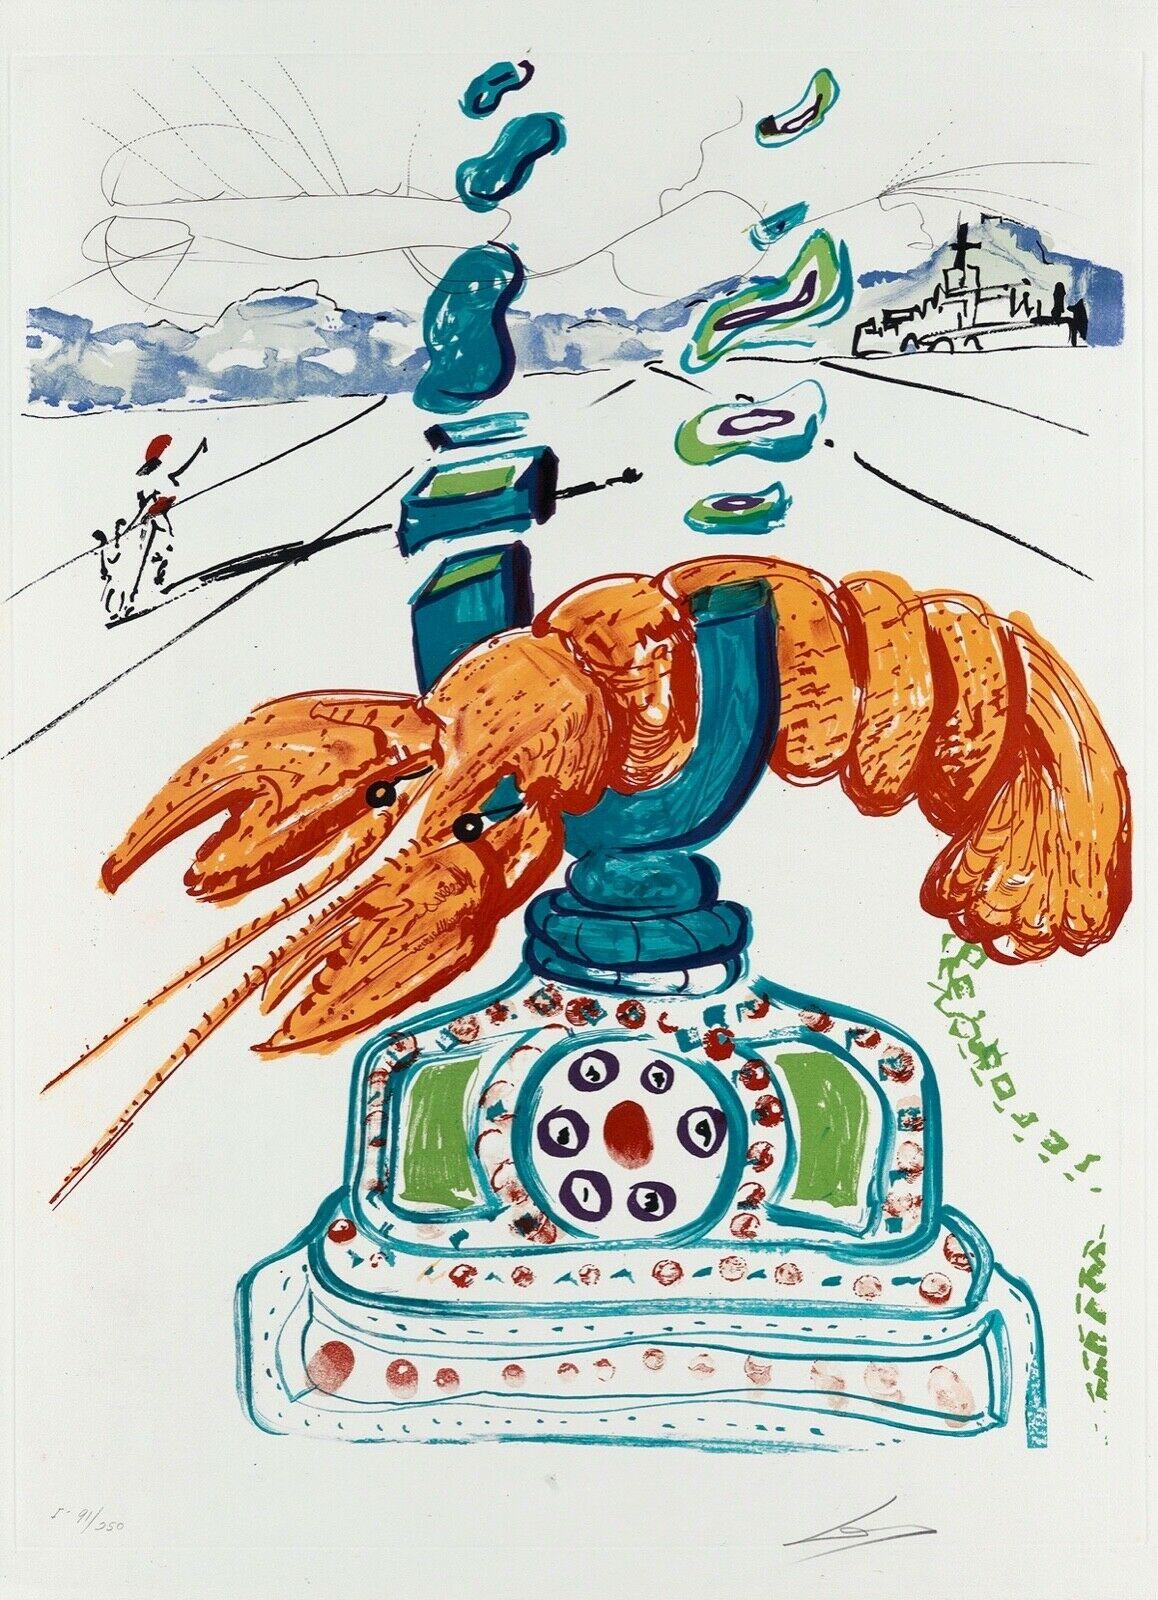 Salvador Dalí Figurative Print - Cybernetic Lobster Telephone, Limited Edition Lithograph, Salvador Dali